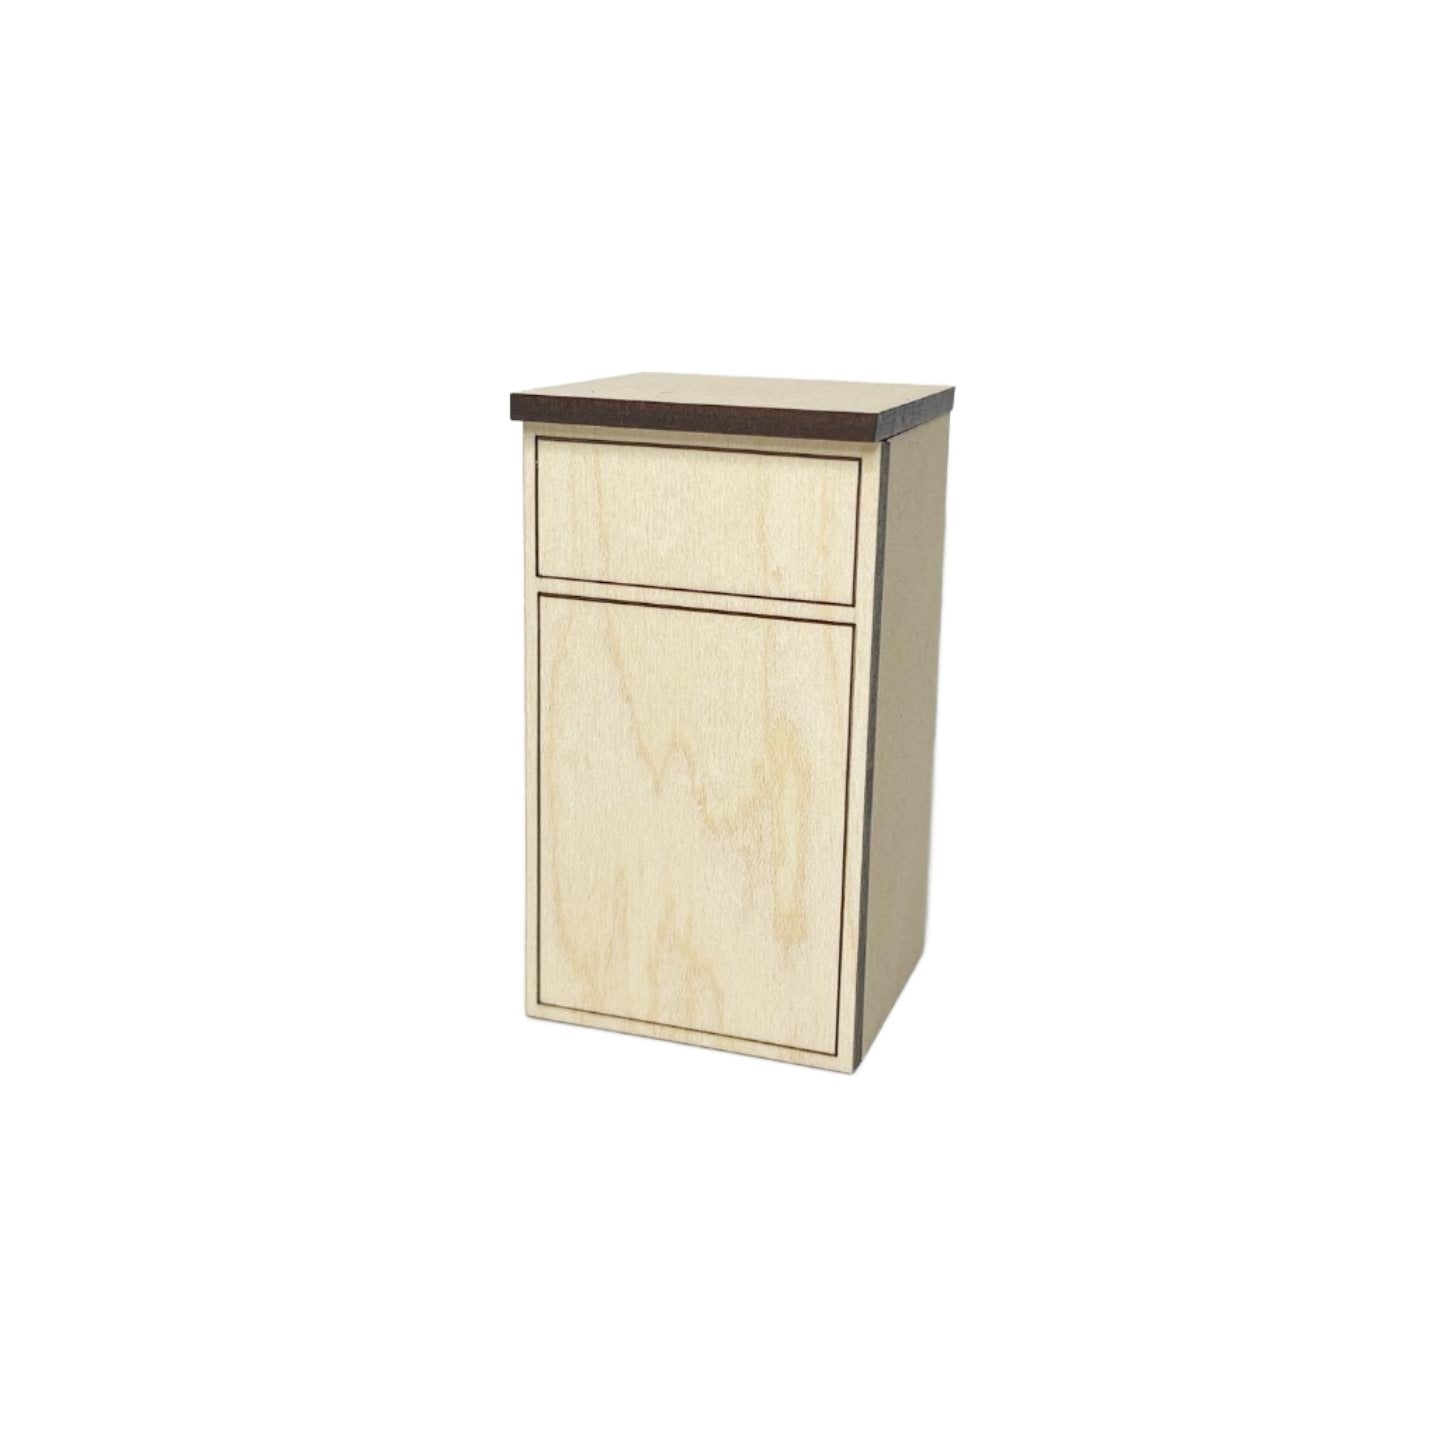 Single Lower Cabinet with Doors, Standard